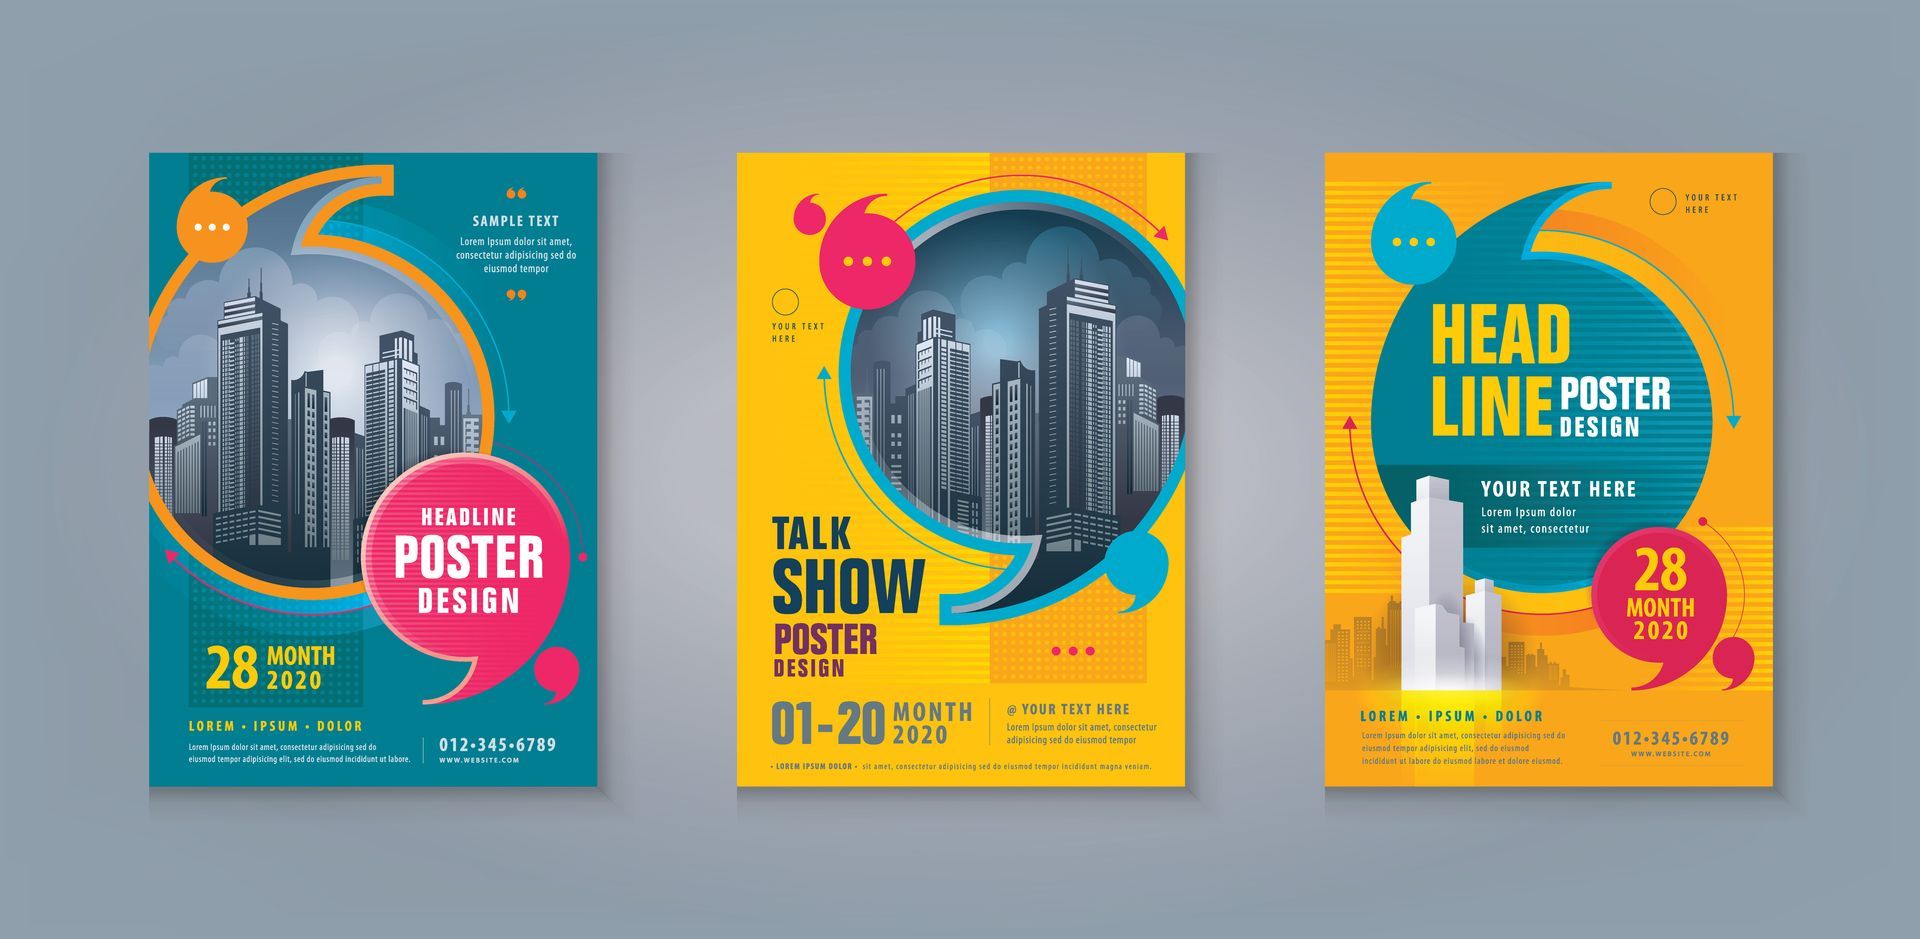 Reading Custom Posters For Conferences & Trade Shows